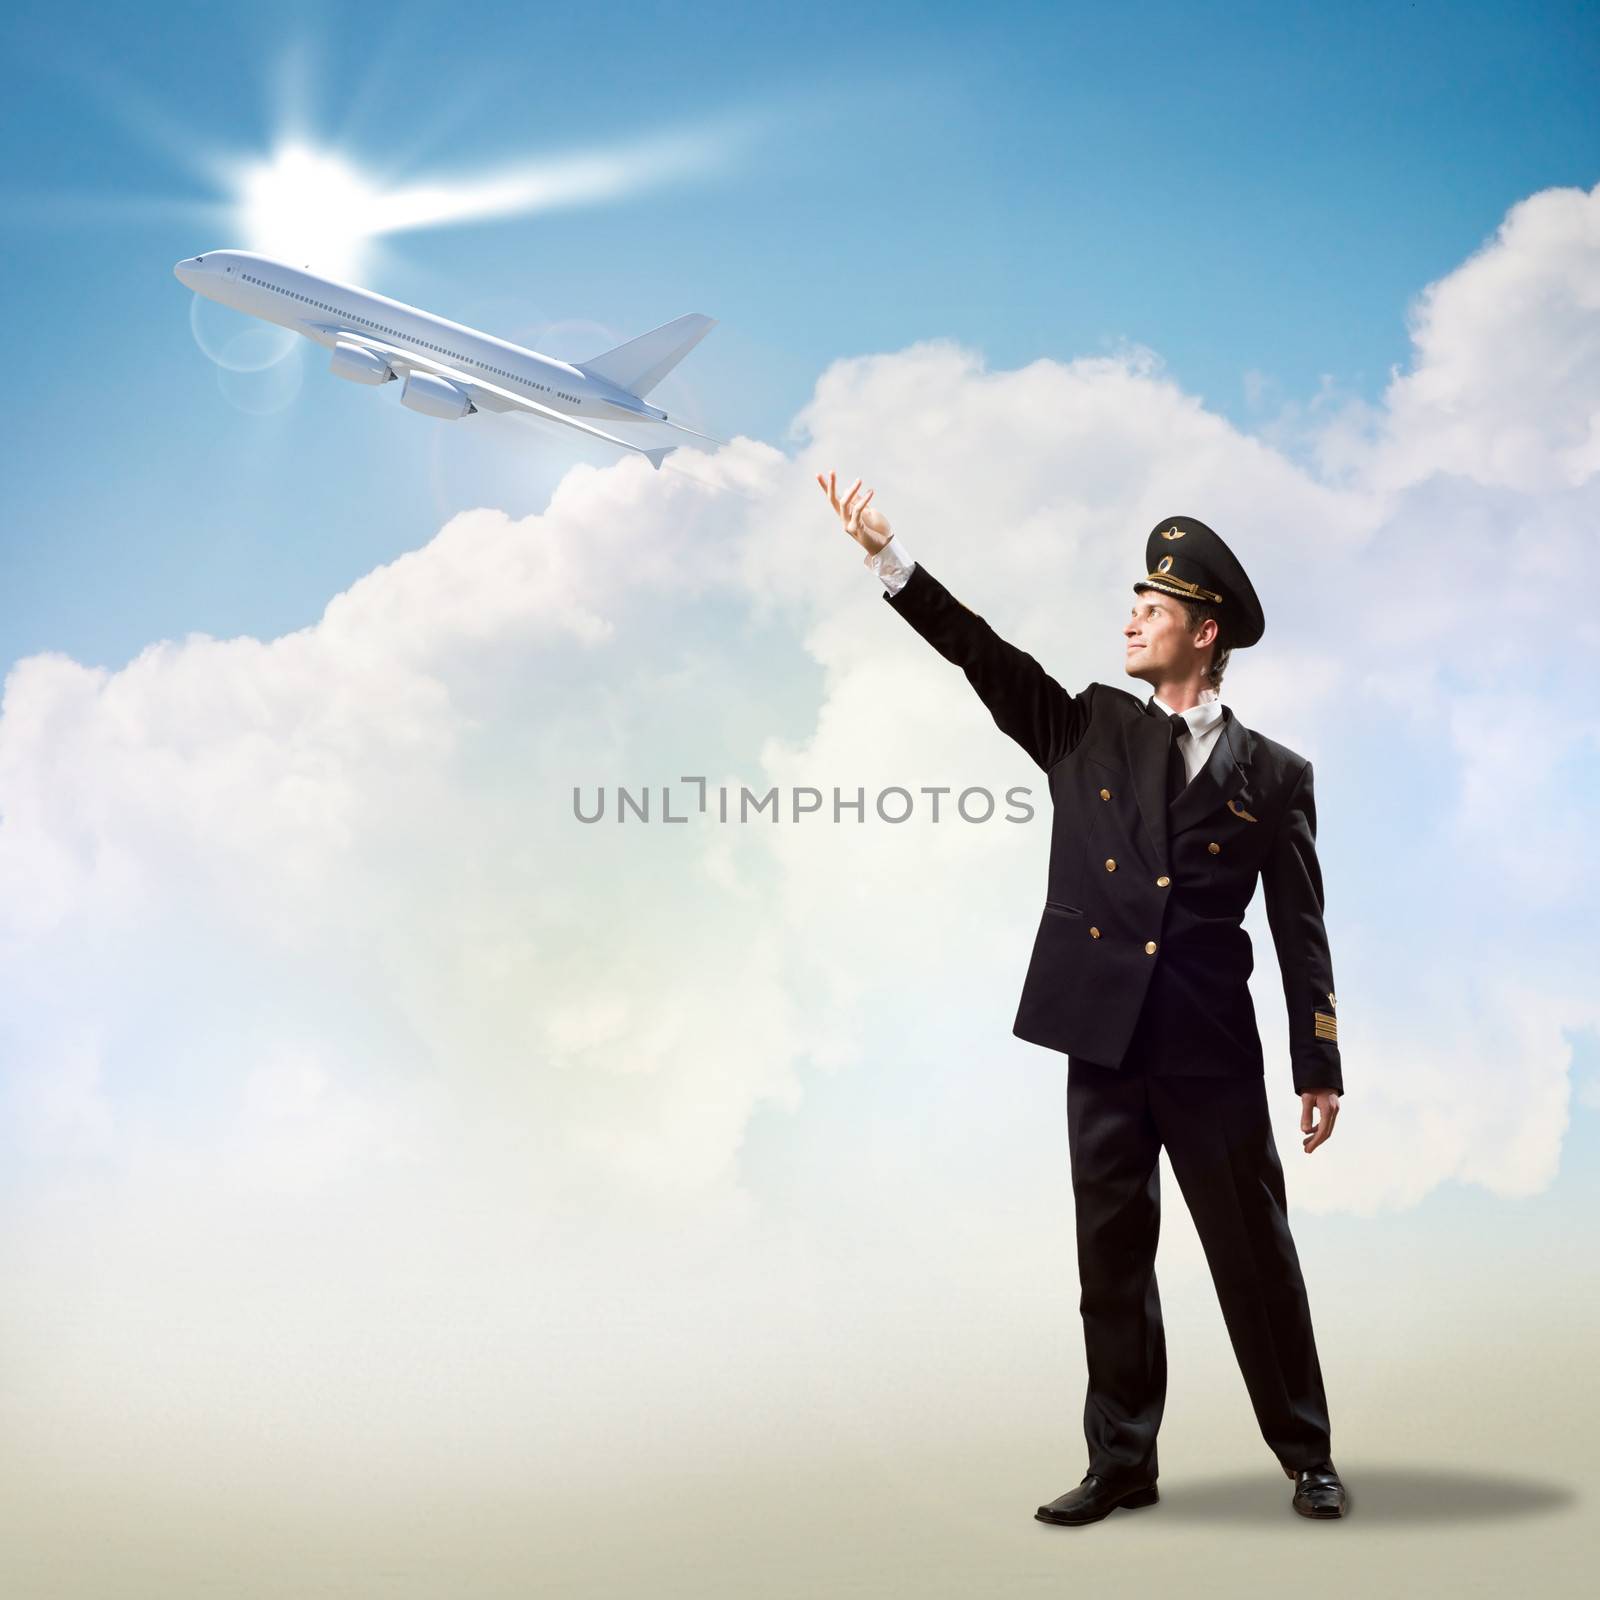 pilot in the form of extending a hand to airplane by adam121